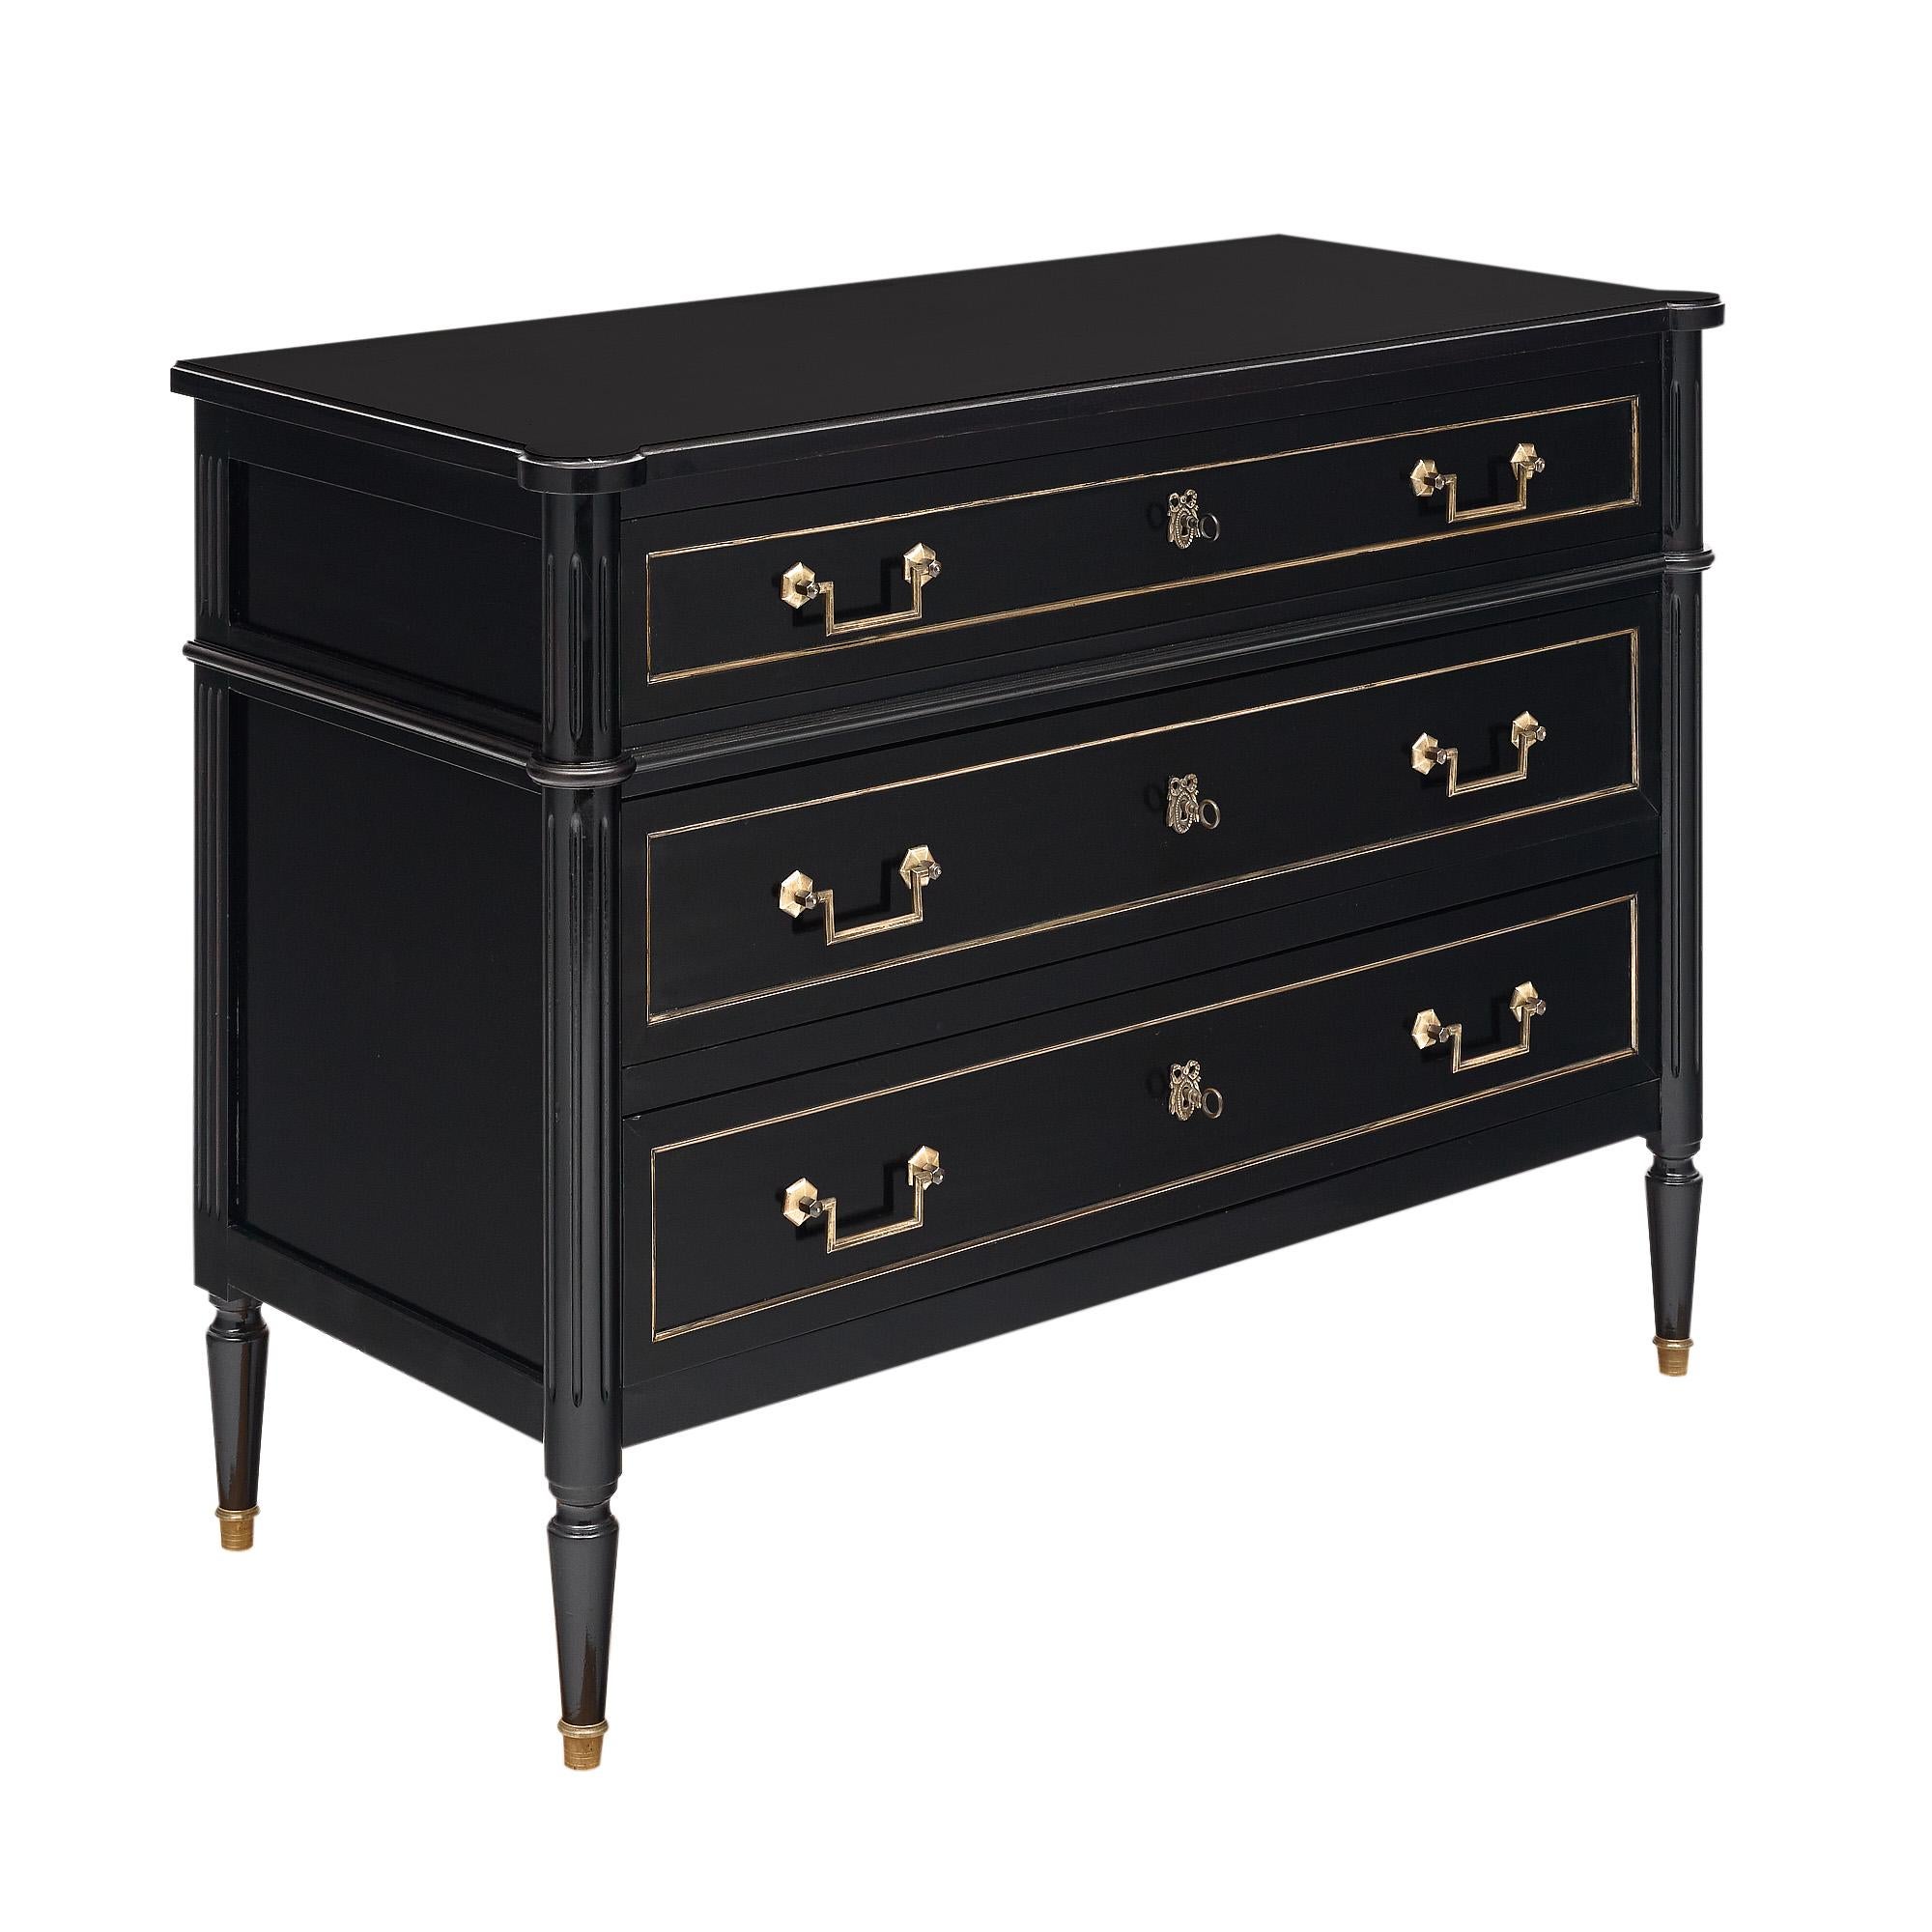 Chest of drawers from France in the Louis XVI style. This piece has been ebonized and finished with a French polish for a lustrous, museum-quality finish. The hardware and trim is all original and finely cast brass. There are three dovetailed